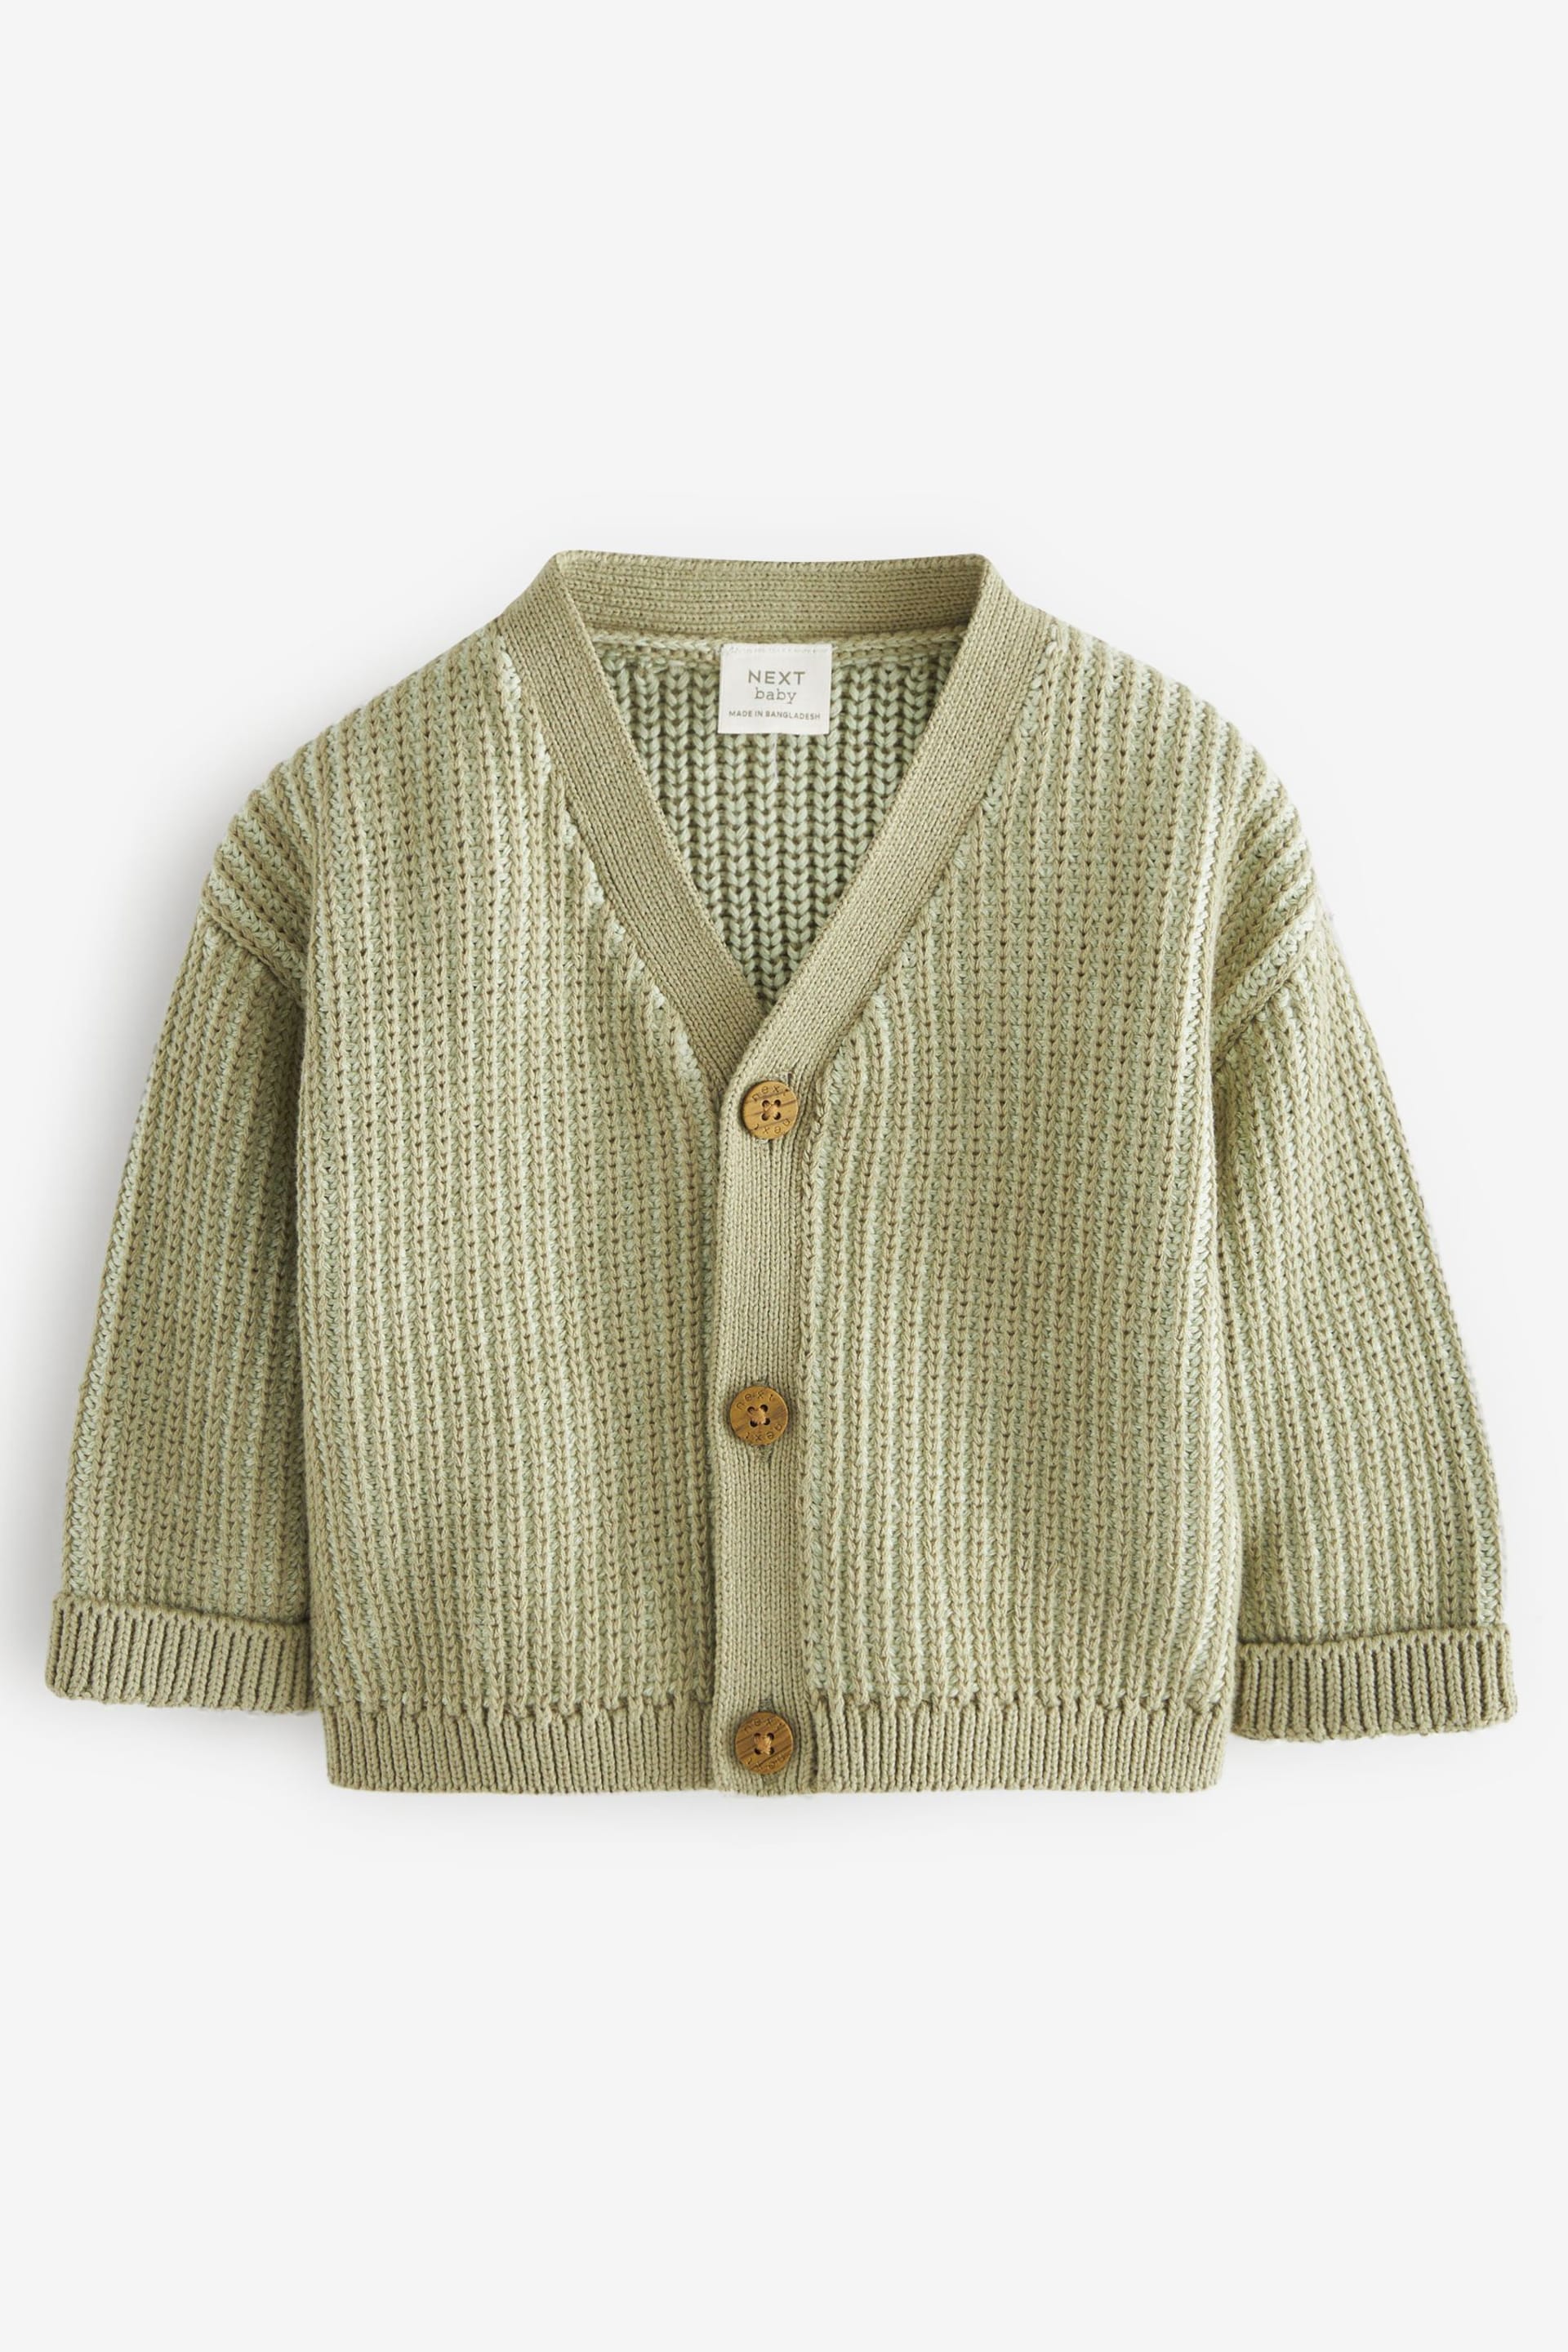 Sage Green Baby Knitted Cardigan (0mths-2yrs) - Image 1 of 3